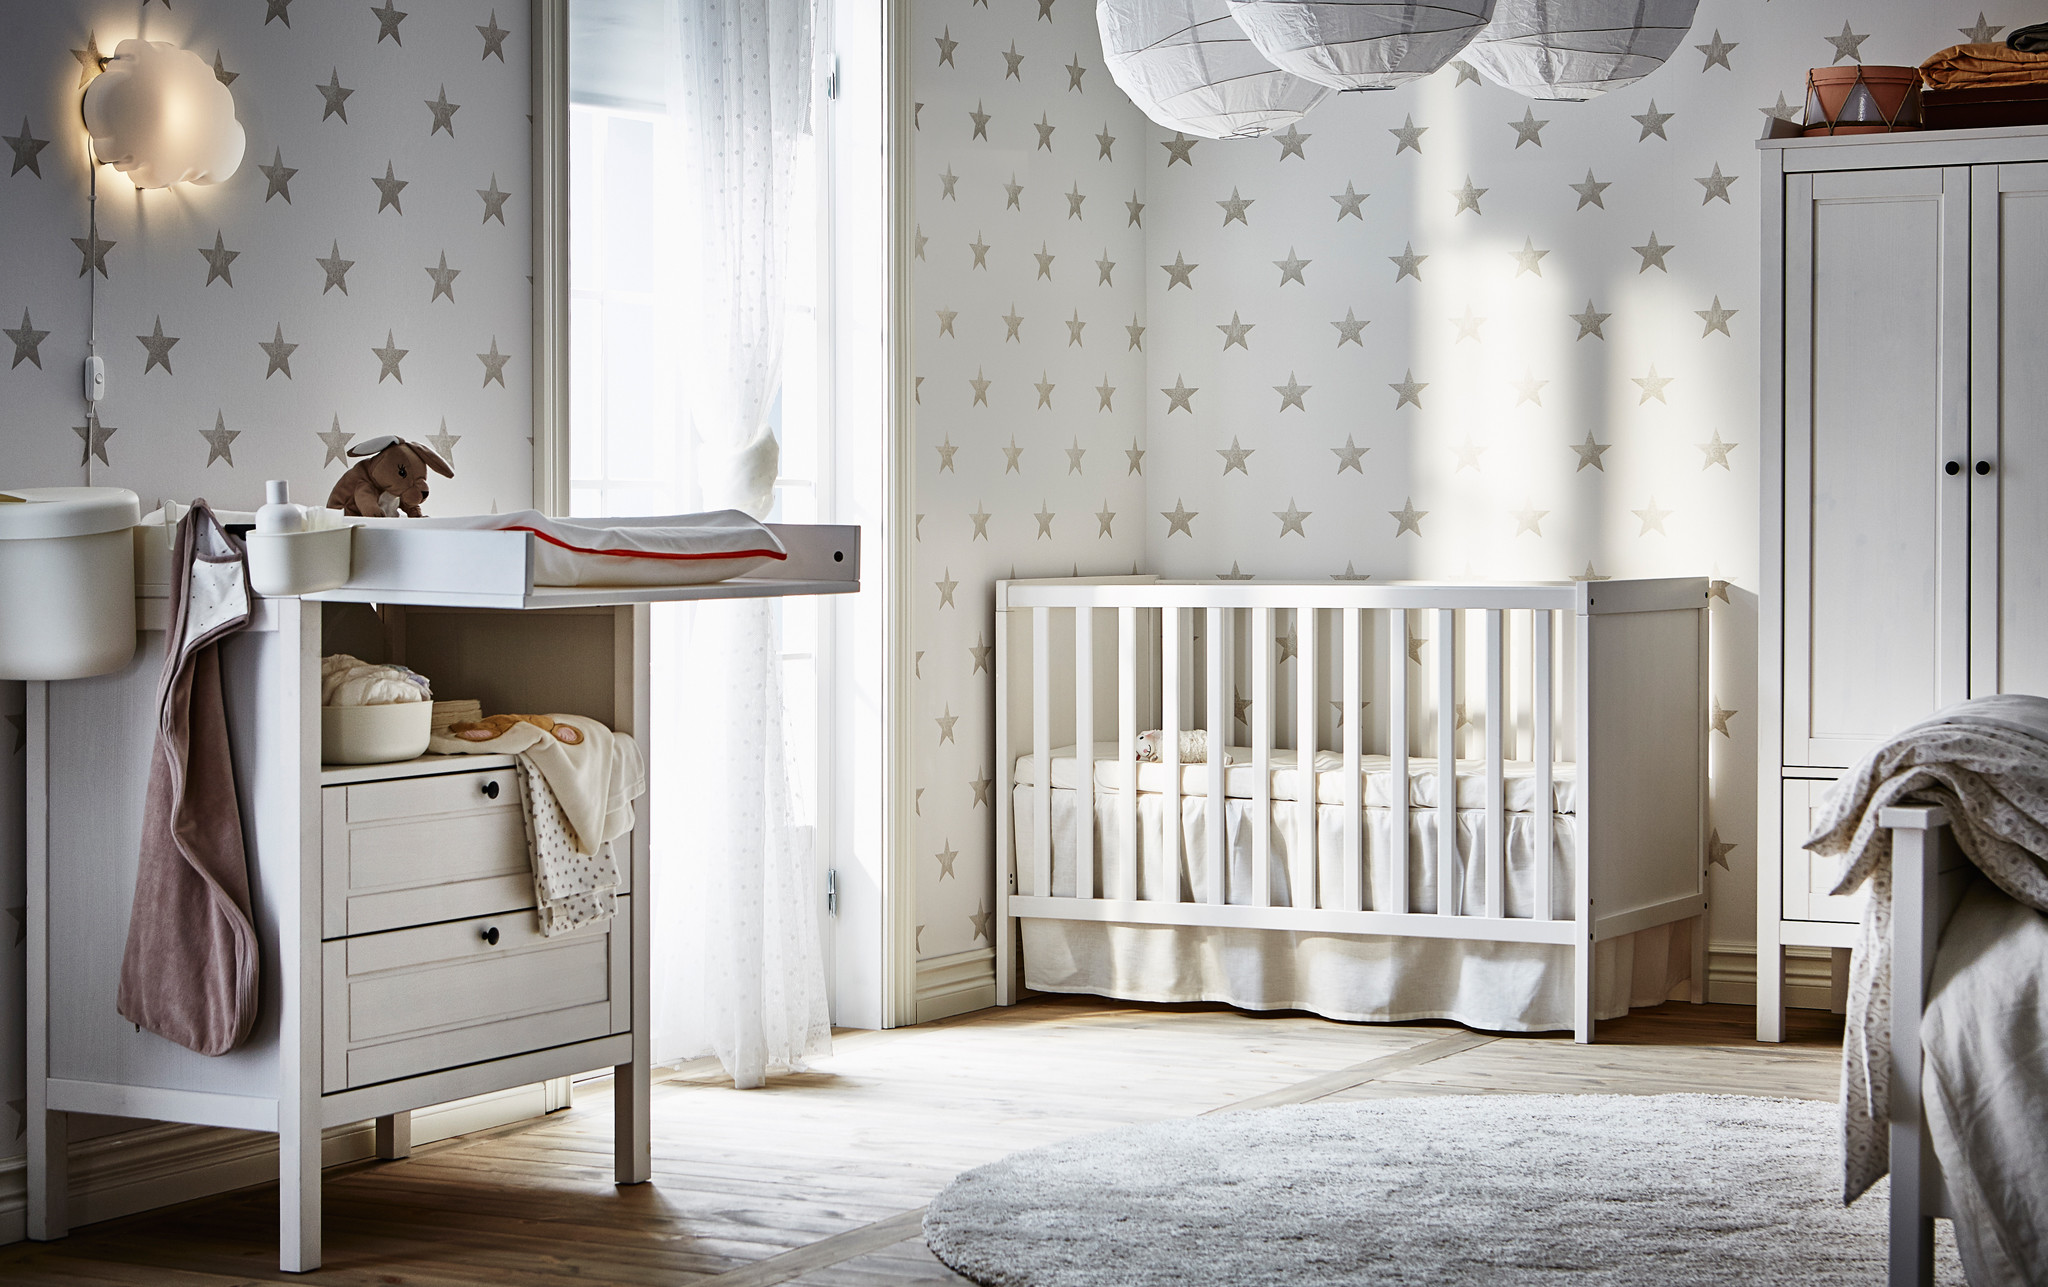 2048x1287 A changing table and cot in a grey and white nursery with star-patterned  wallpaper